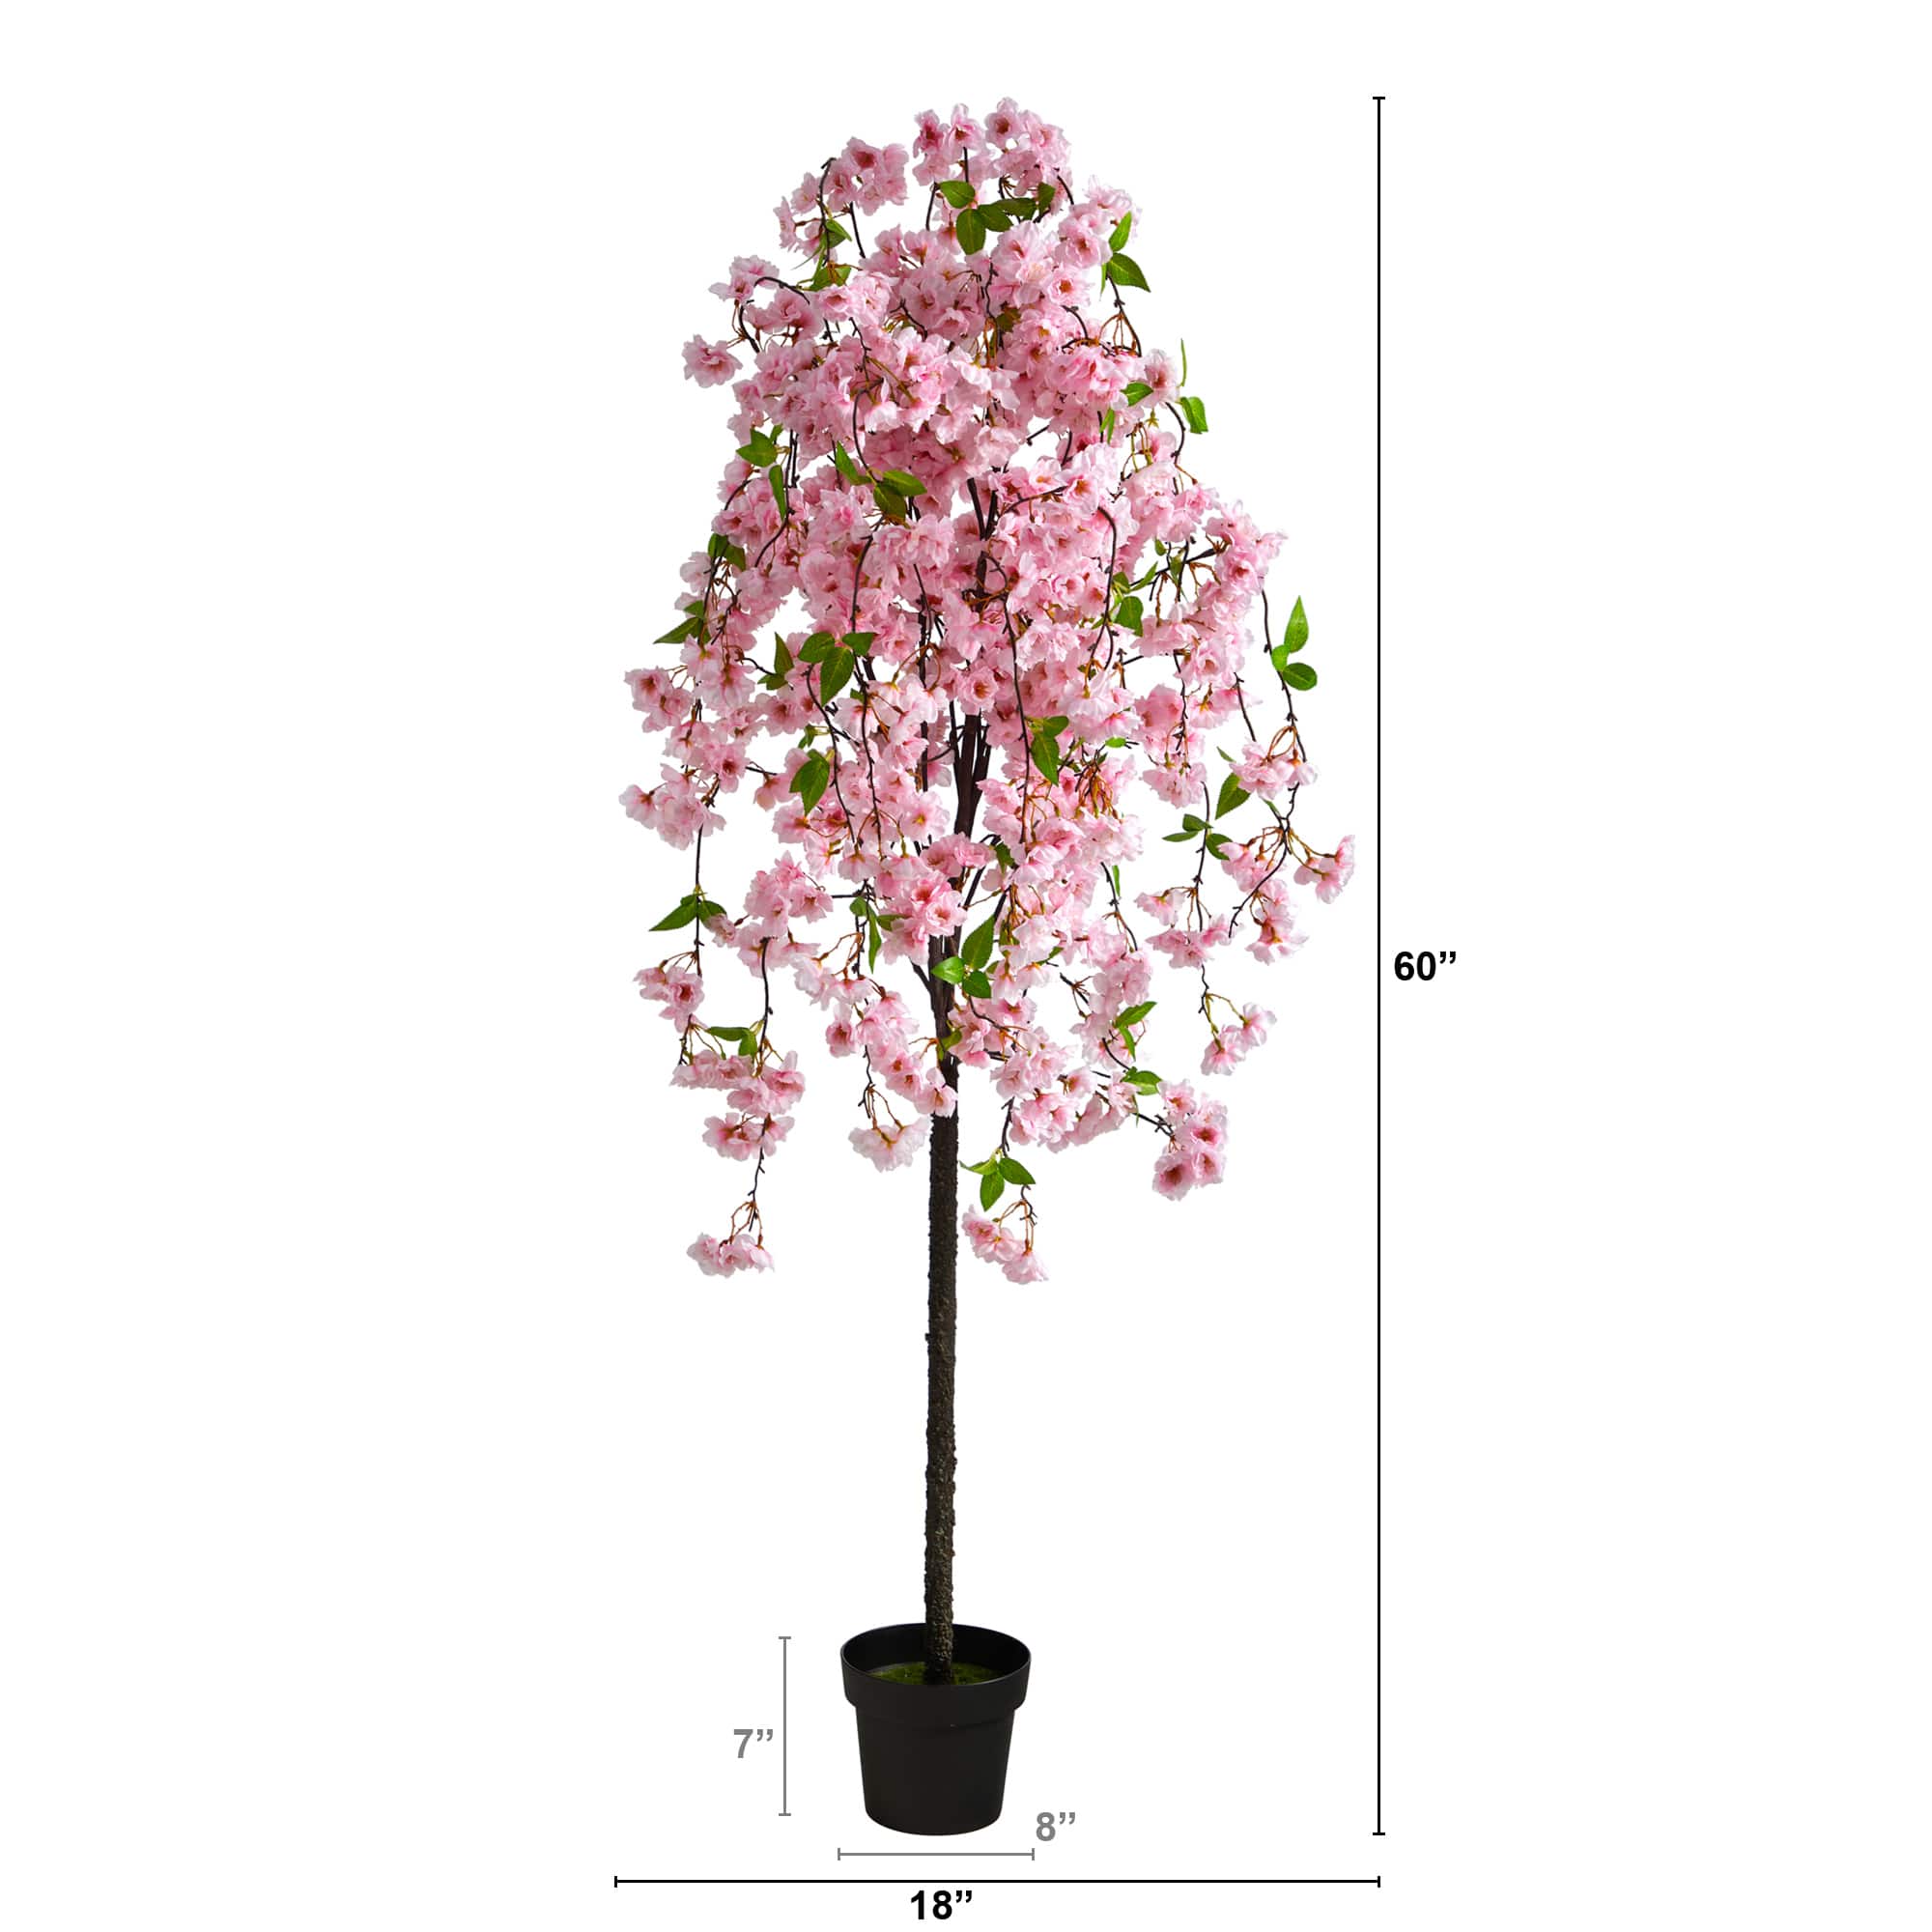 5ft. Potted Cherry Blossom Tree